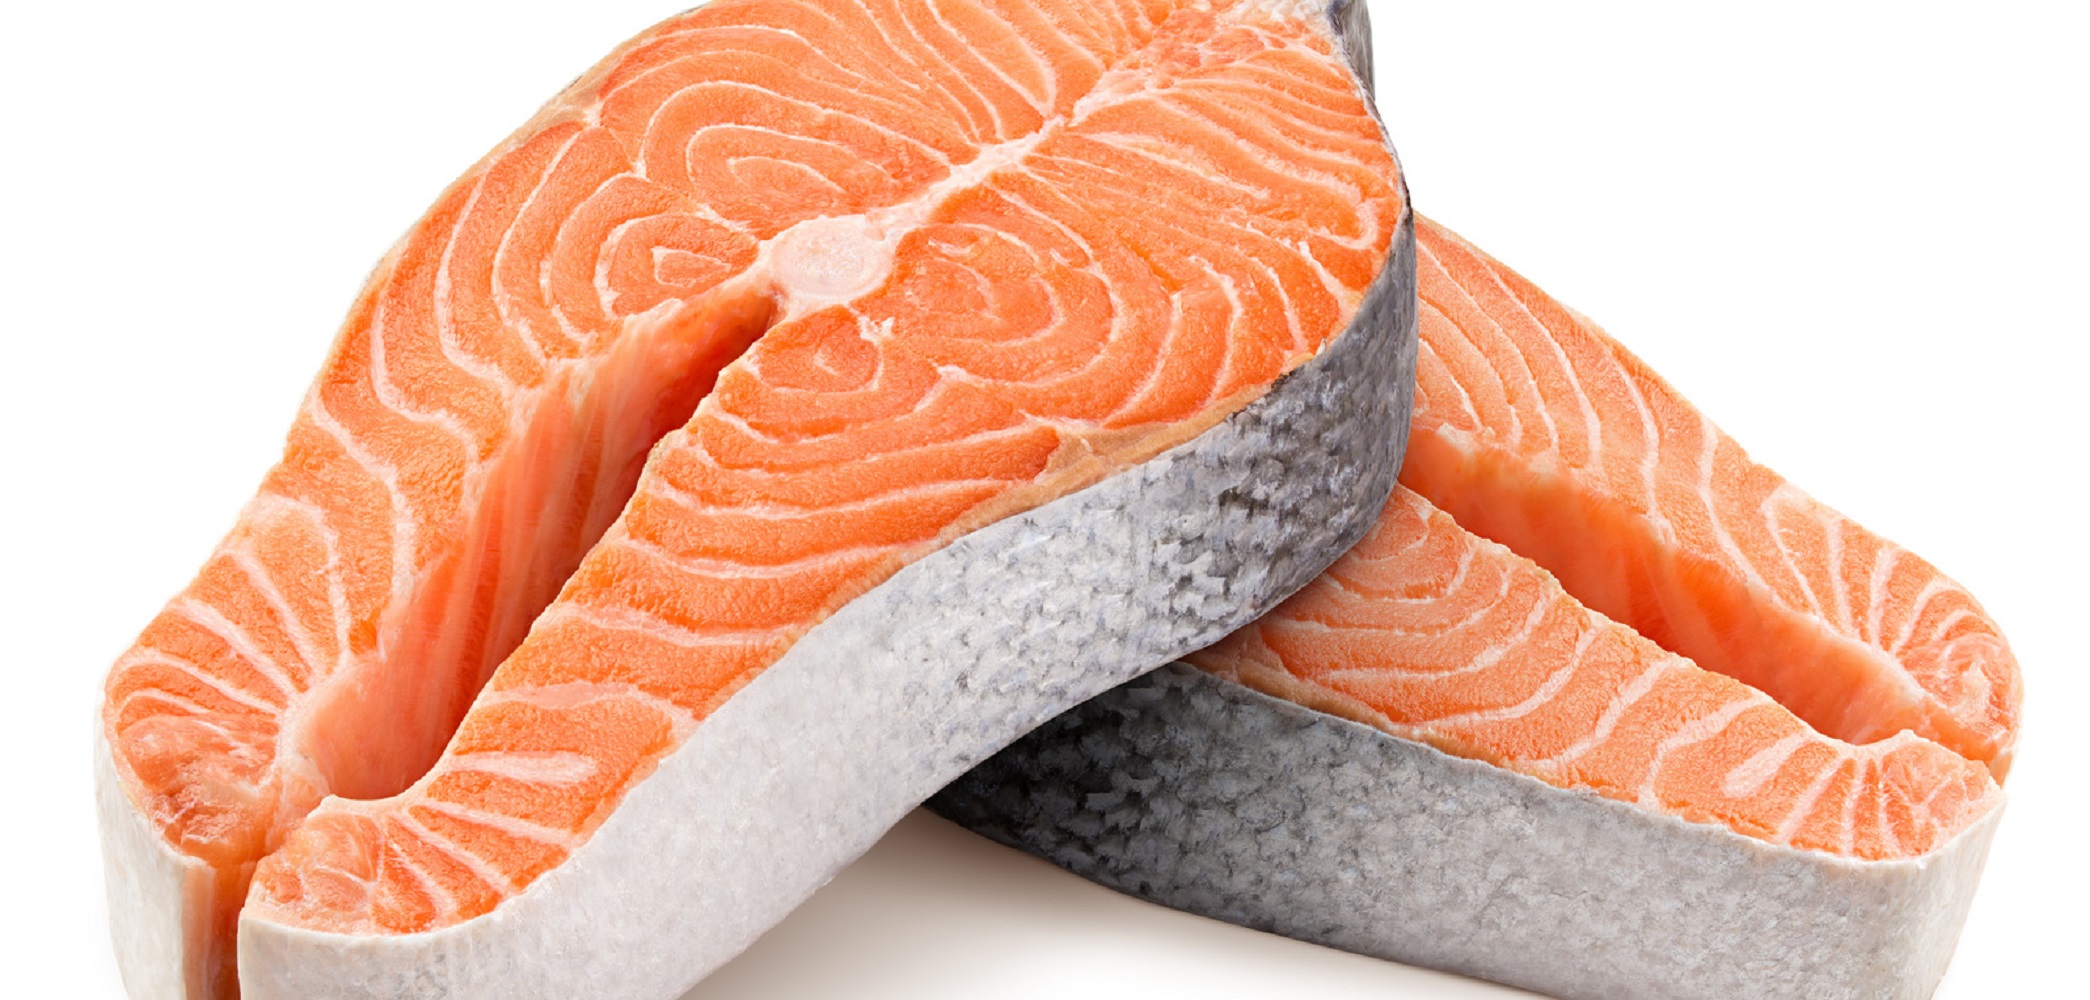 Seafood Delights: Enhance Your Diet with Fish